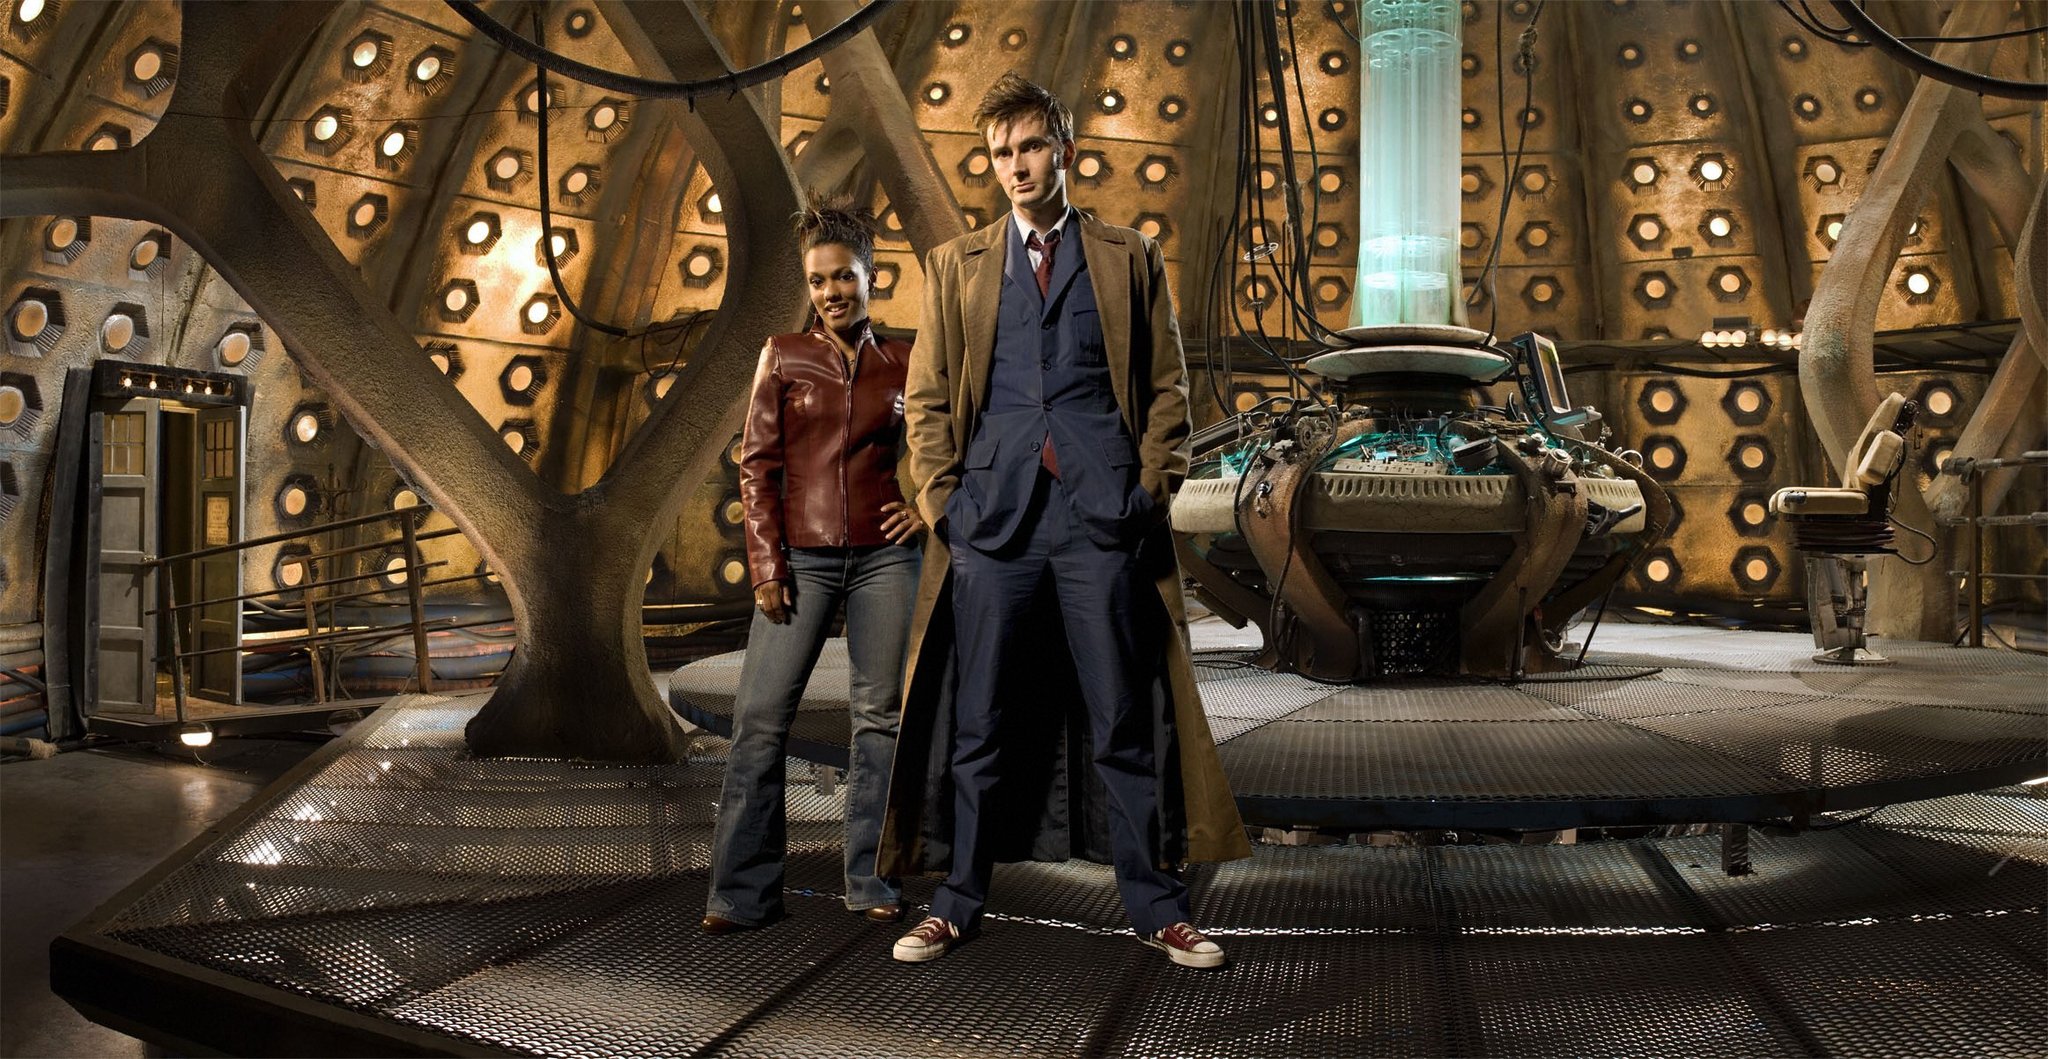 FREEMA AGYEMAN as Martha Jones and DAVID TENNANT as The Doctor. New companion Freema Agyeman takes her first trip in the Tardis in Series Three of Doctor Who.